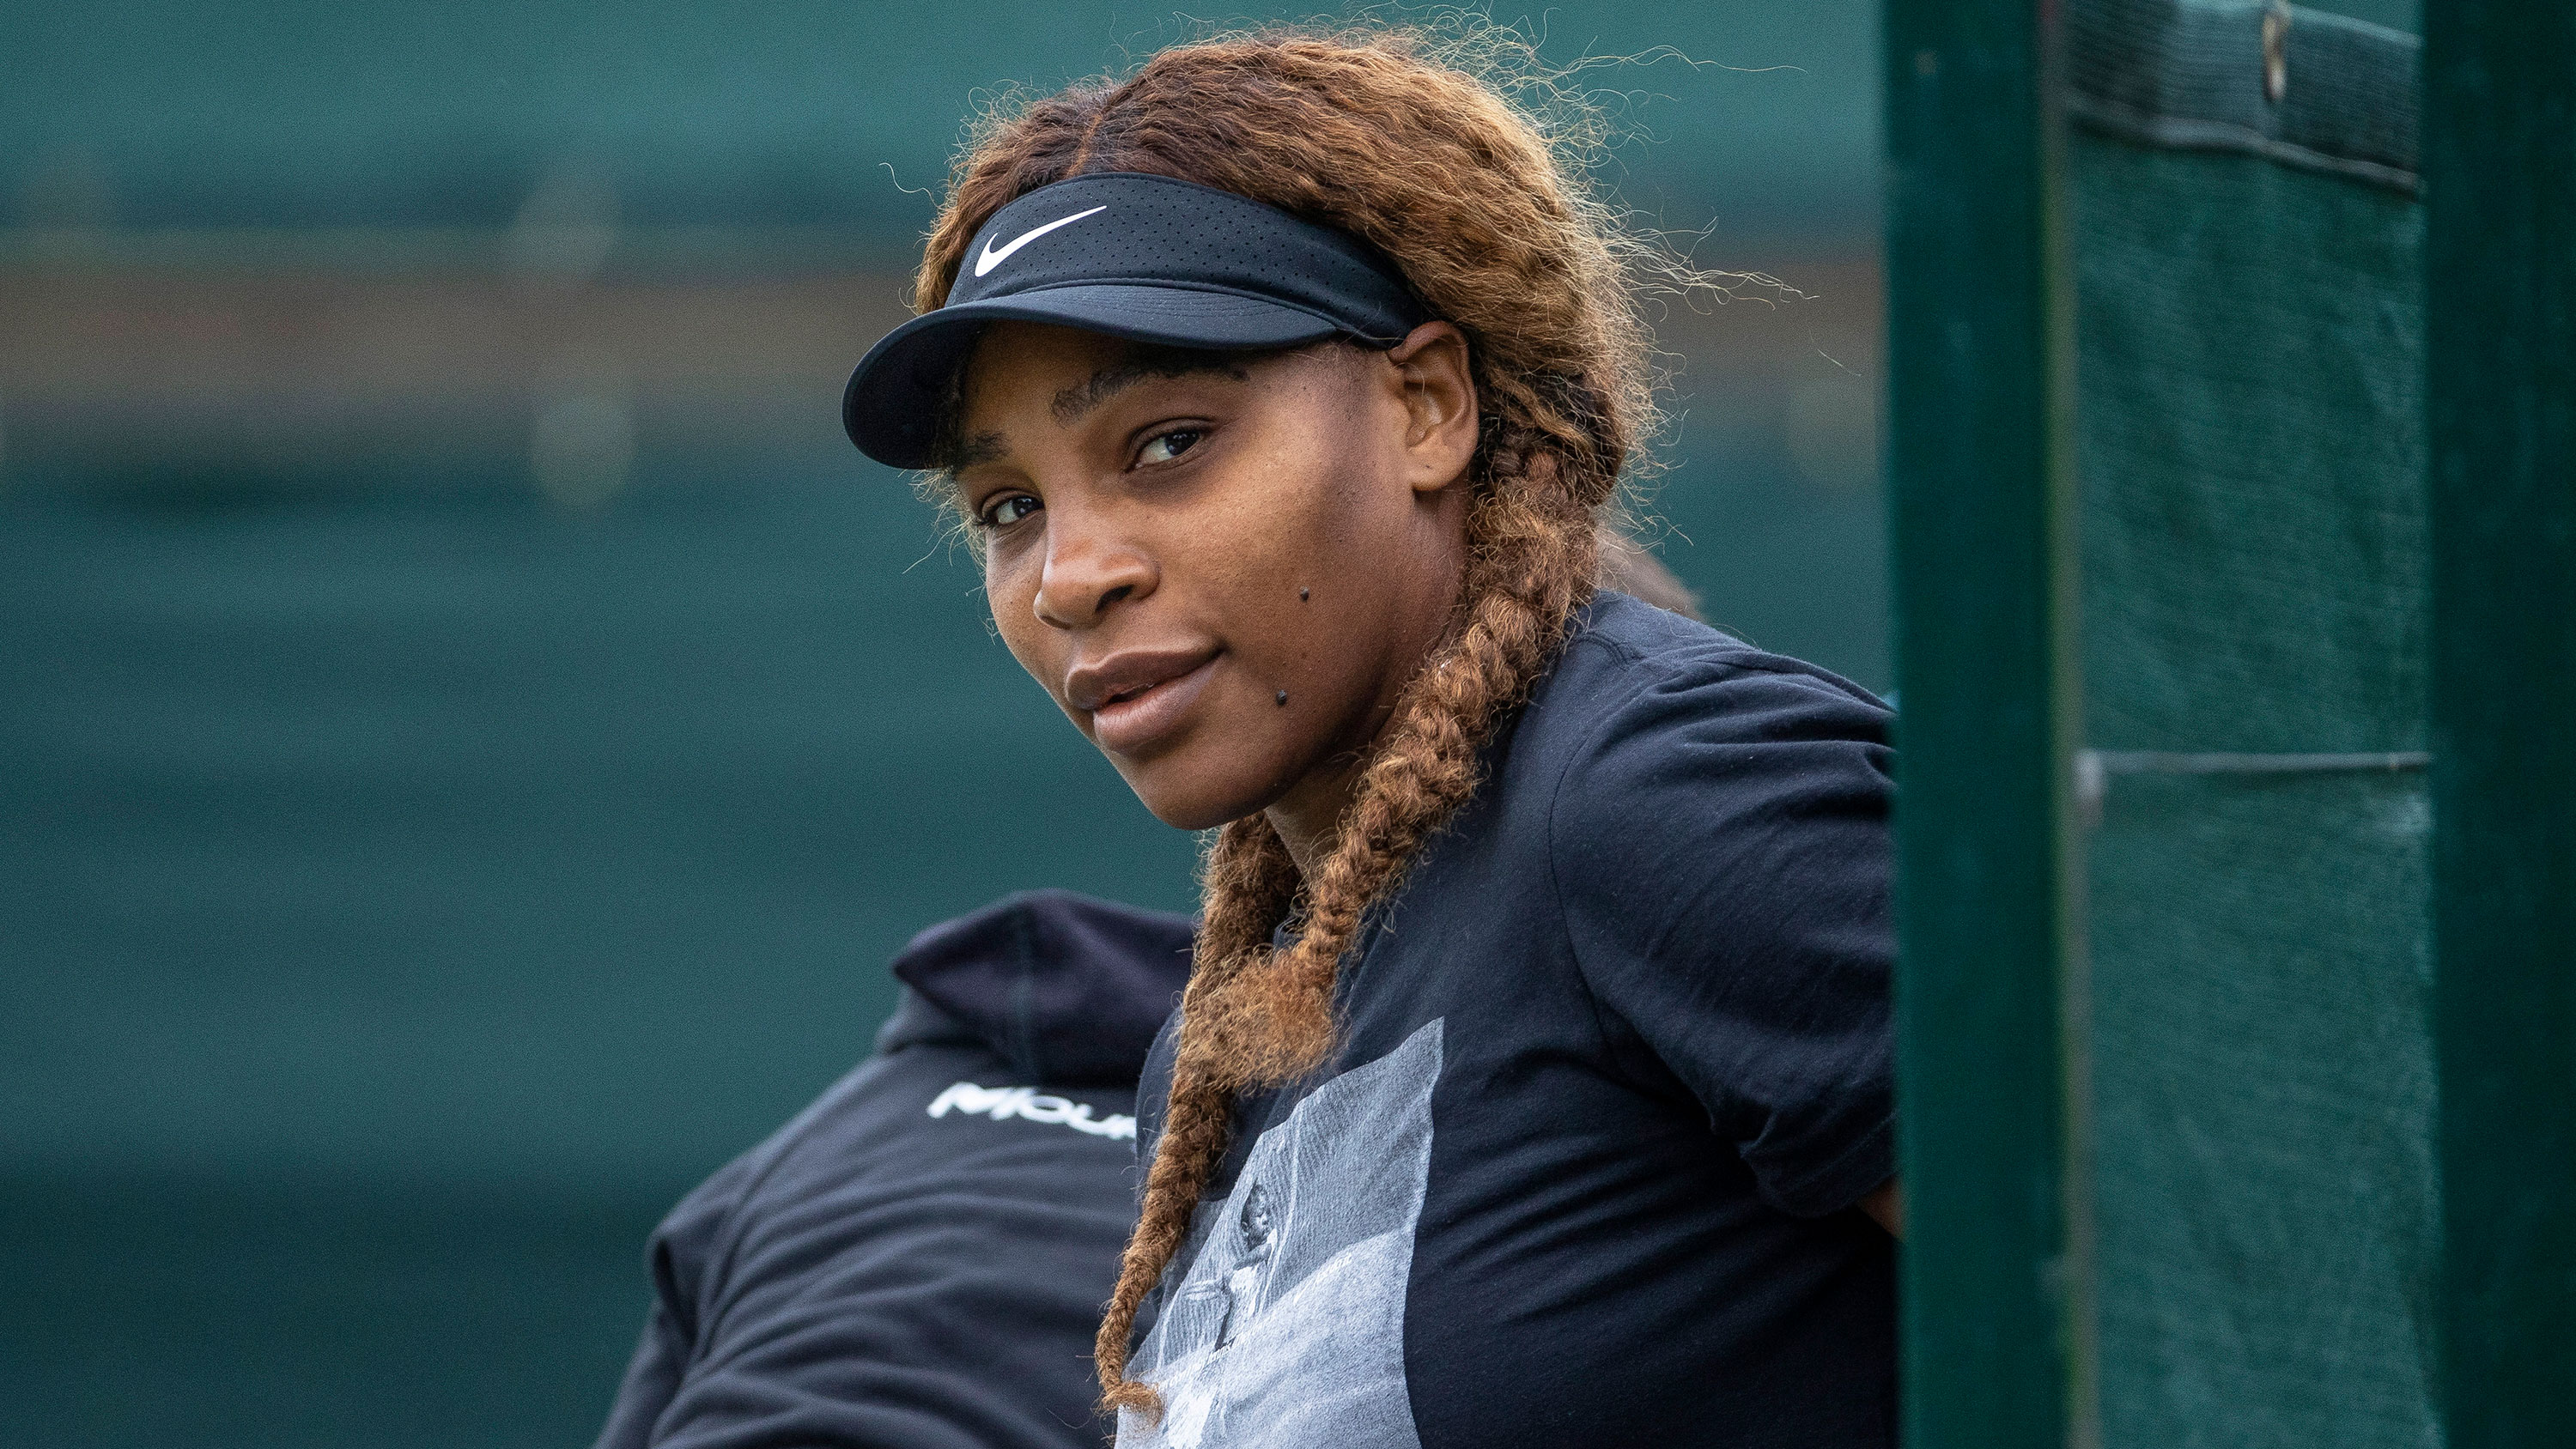 Serena Williams appears to announce she plans to play at Wimbledon | CNN